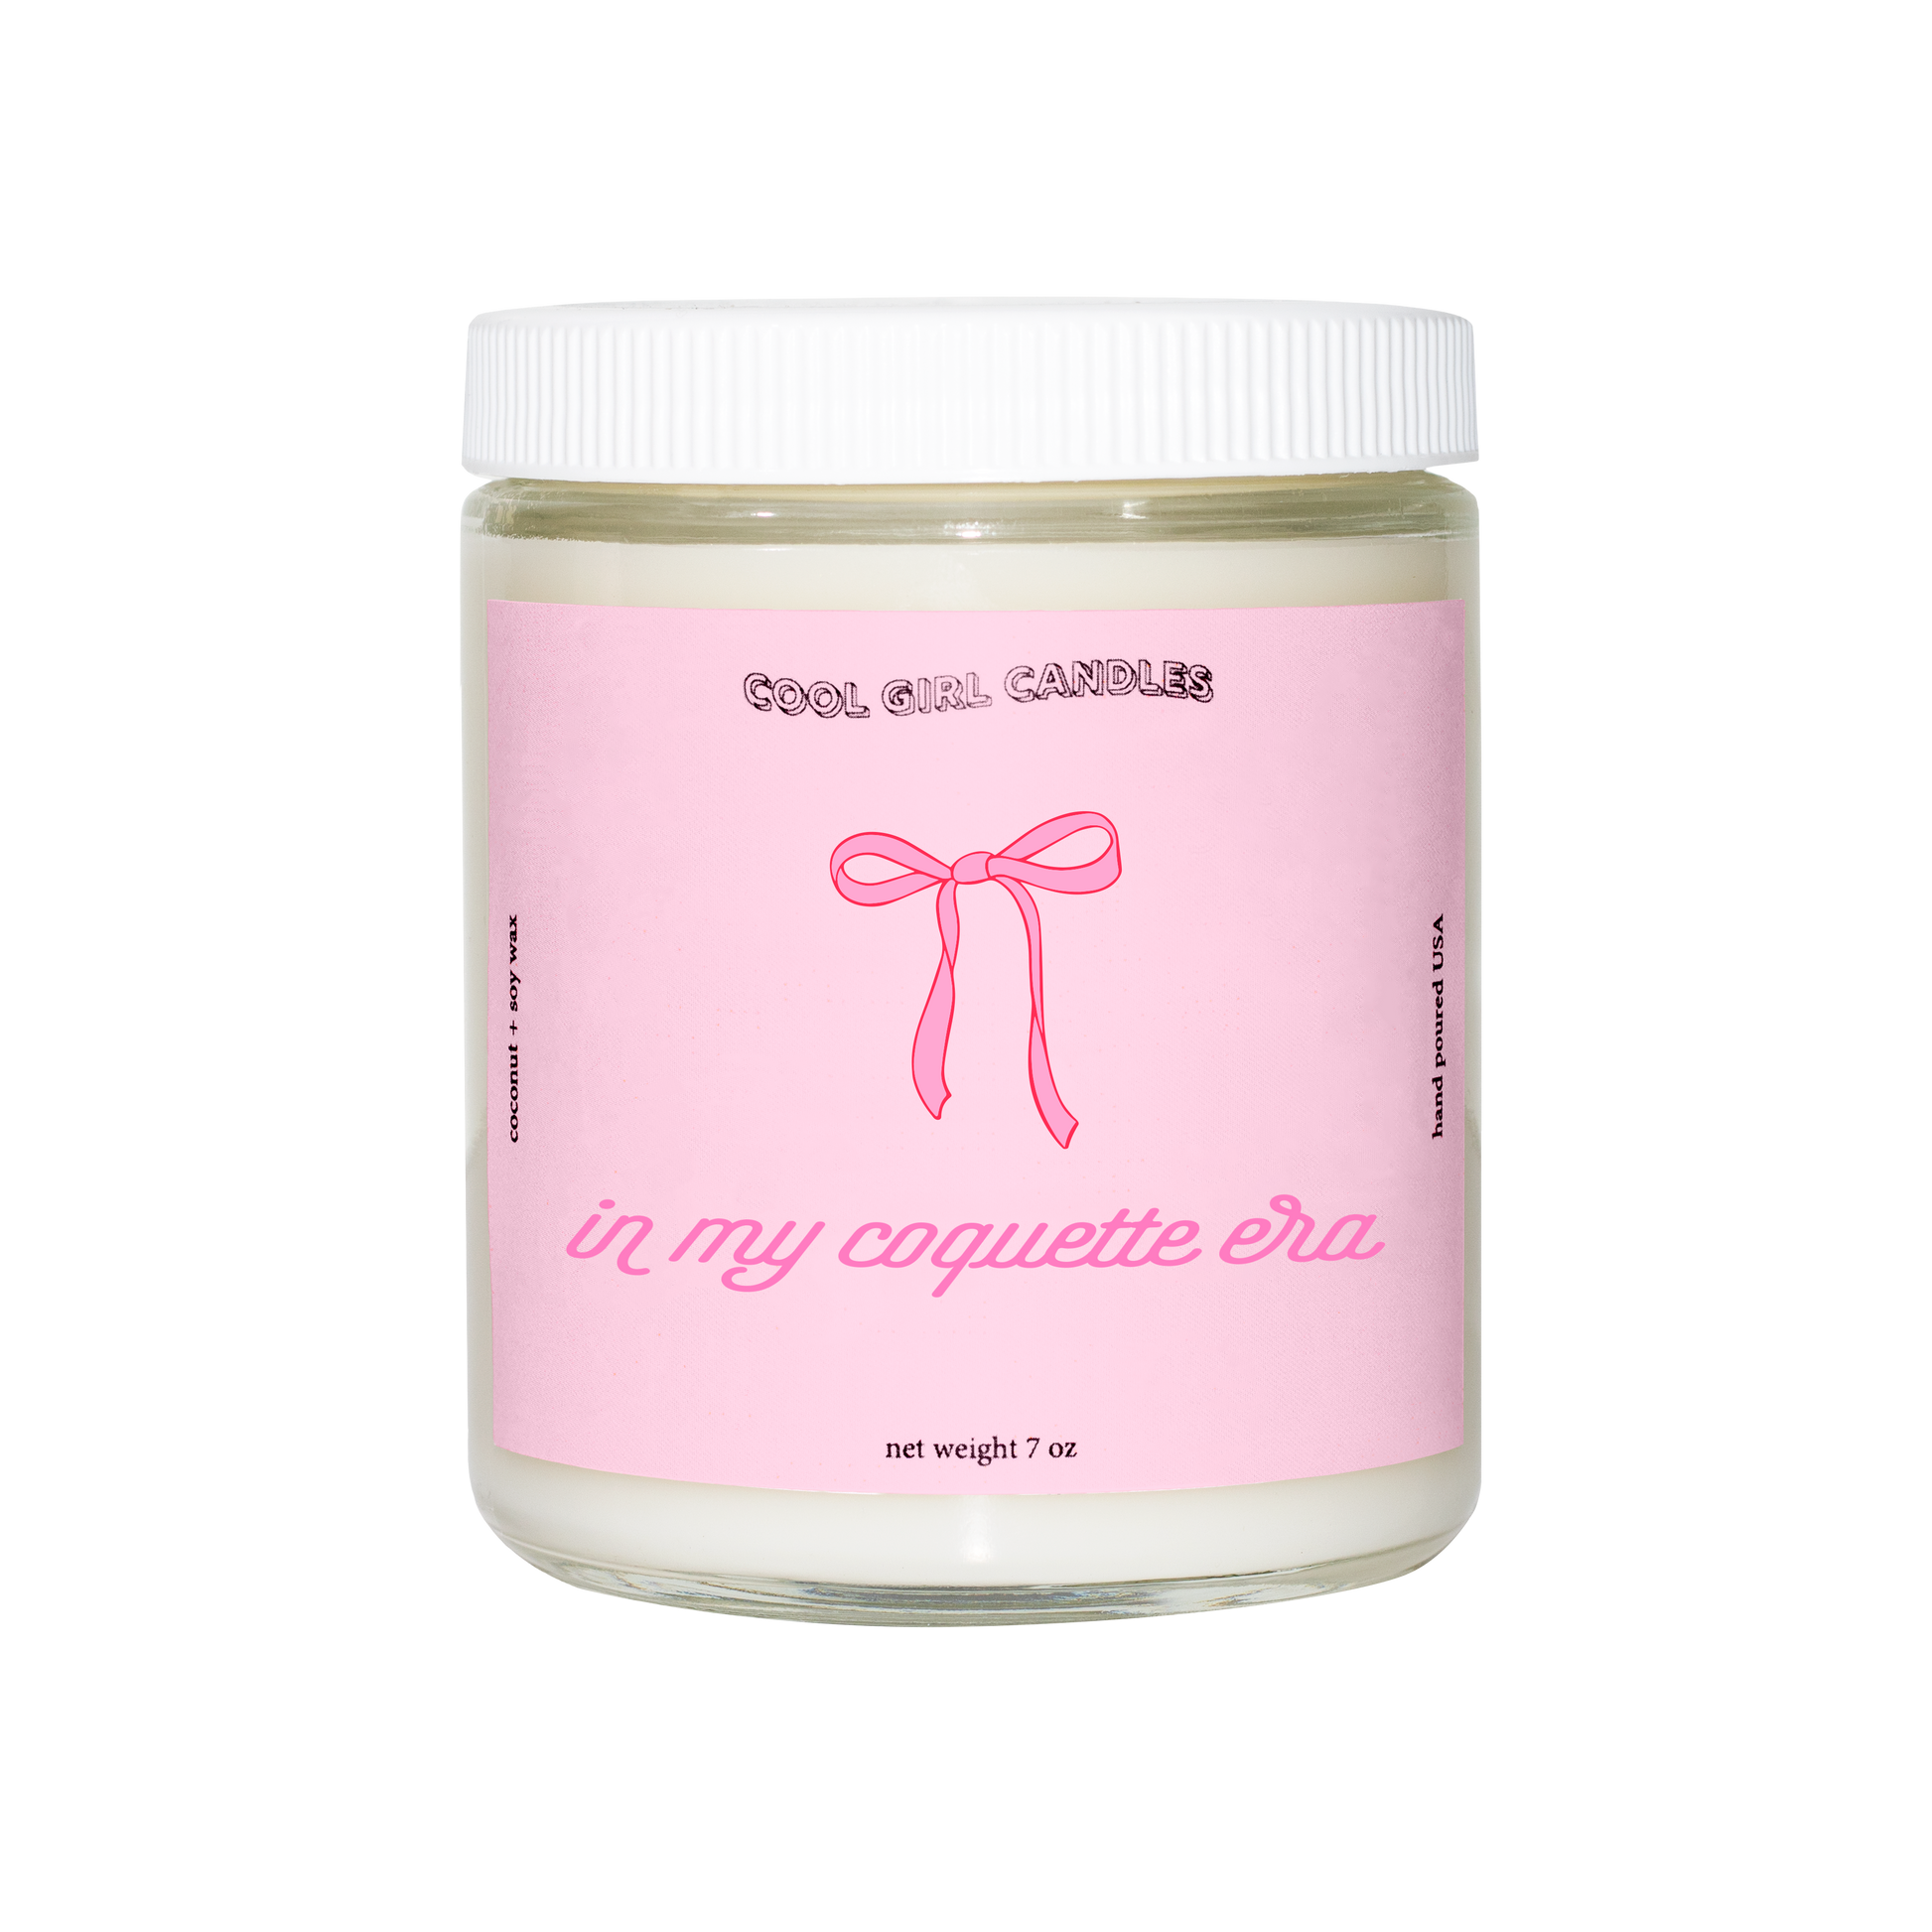 cute coquette era bow candle gift for teens and young adults